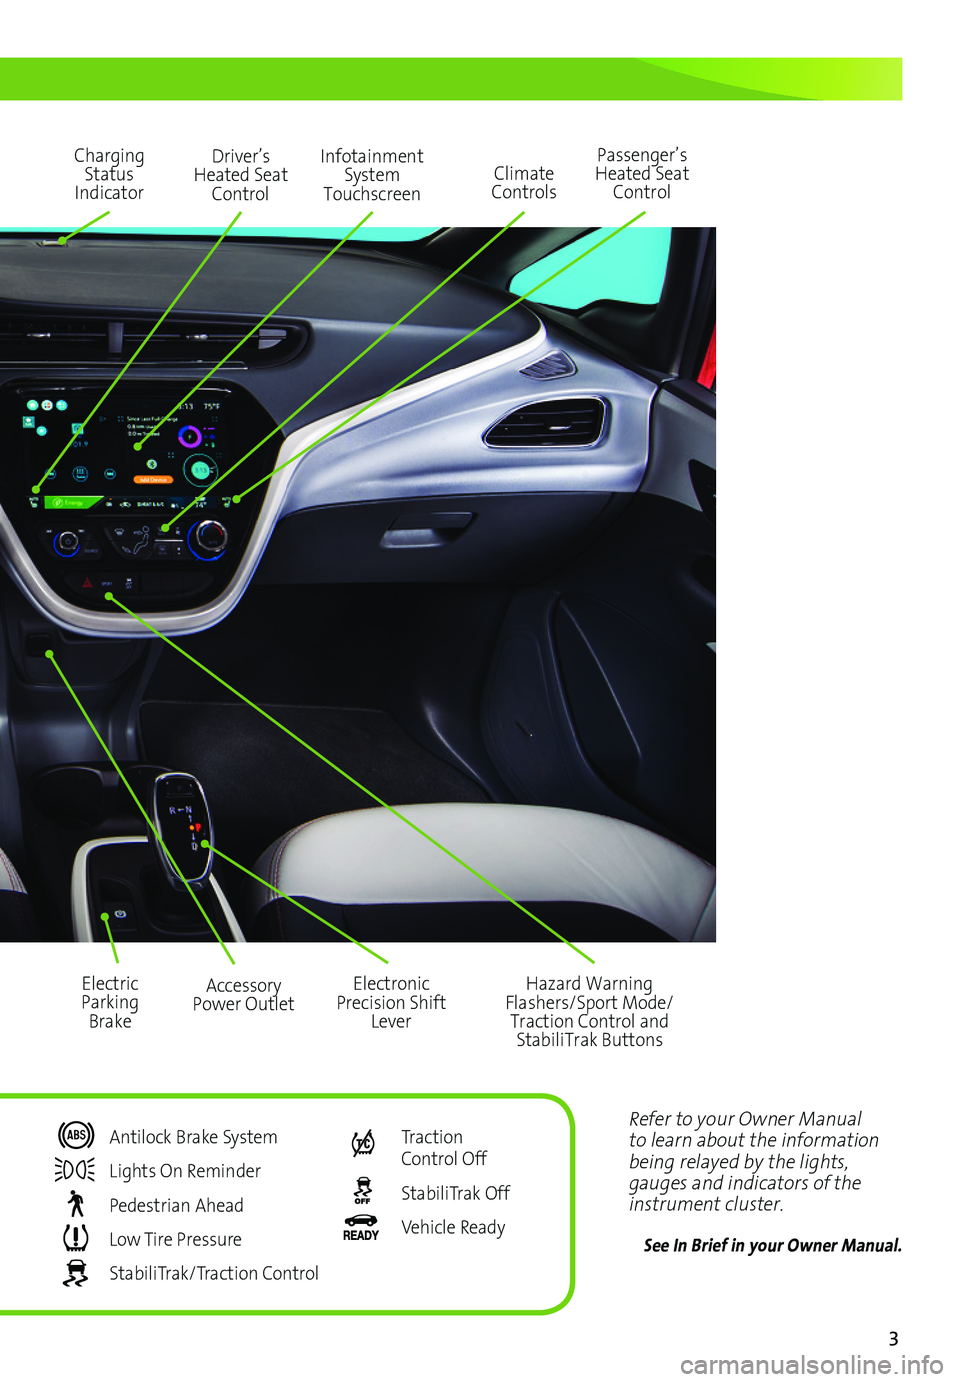 CHEVROLET BOLT EV 2017  Owners Manual 3
Refer to your Owner Manual to learn about the information being relayed by the lights, gauges and indicators of the instrument cluster.
See In Brief in your Owner Manual.
Driver’s Heated Seat Cont